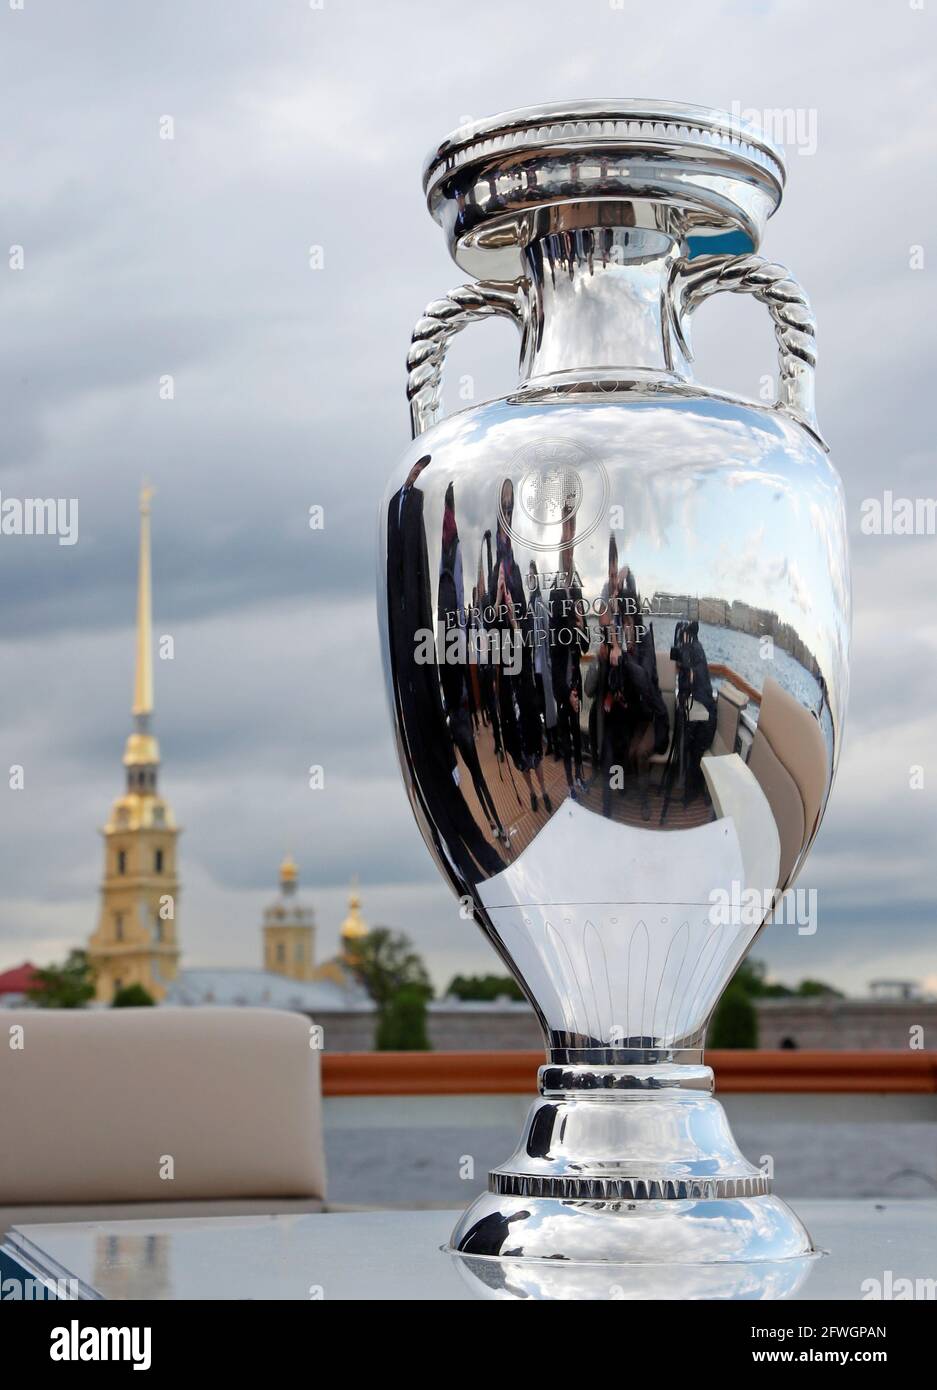 The Euro 2020 trophy is pictured during a boat in Saint Petersburg, Russia May 22, 2021. REUTERS/Anton Photo - Alamy